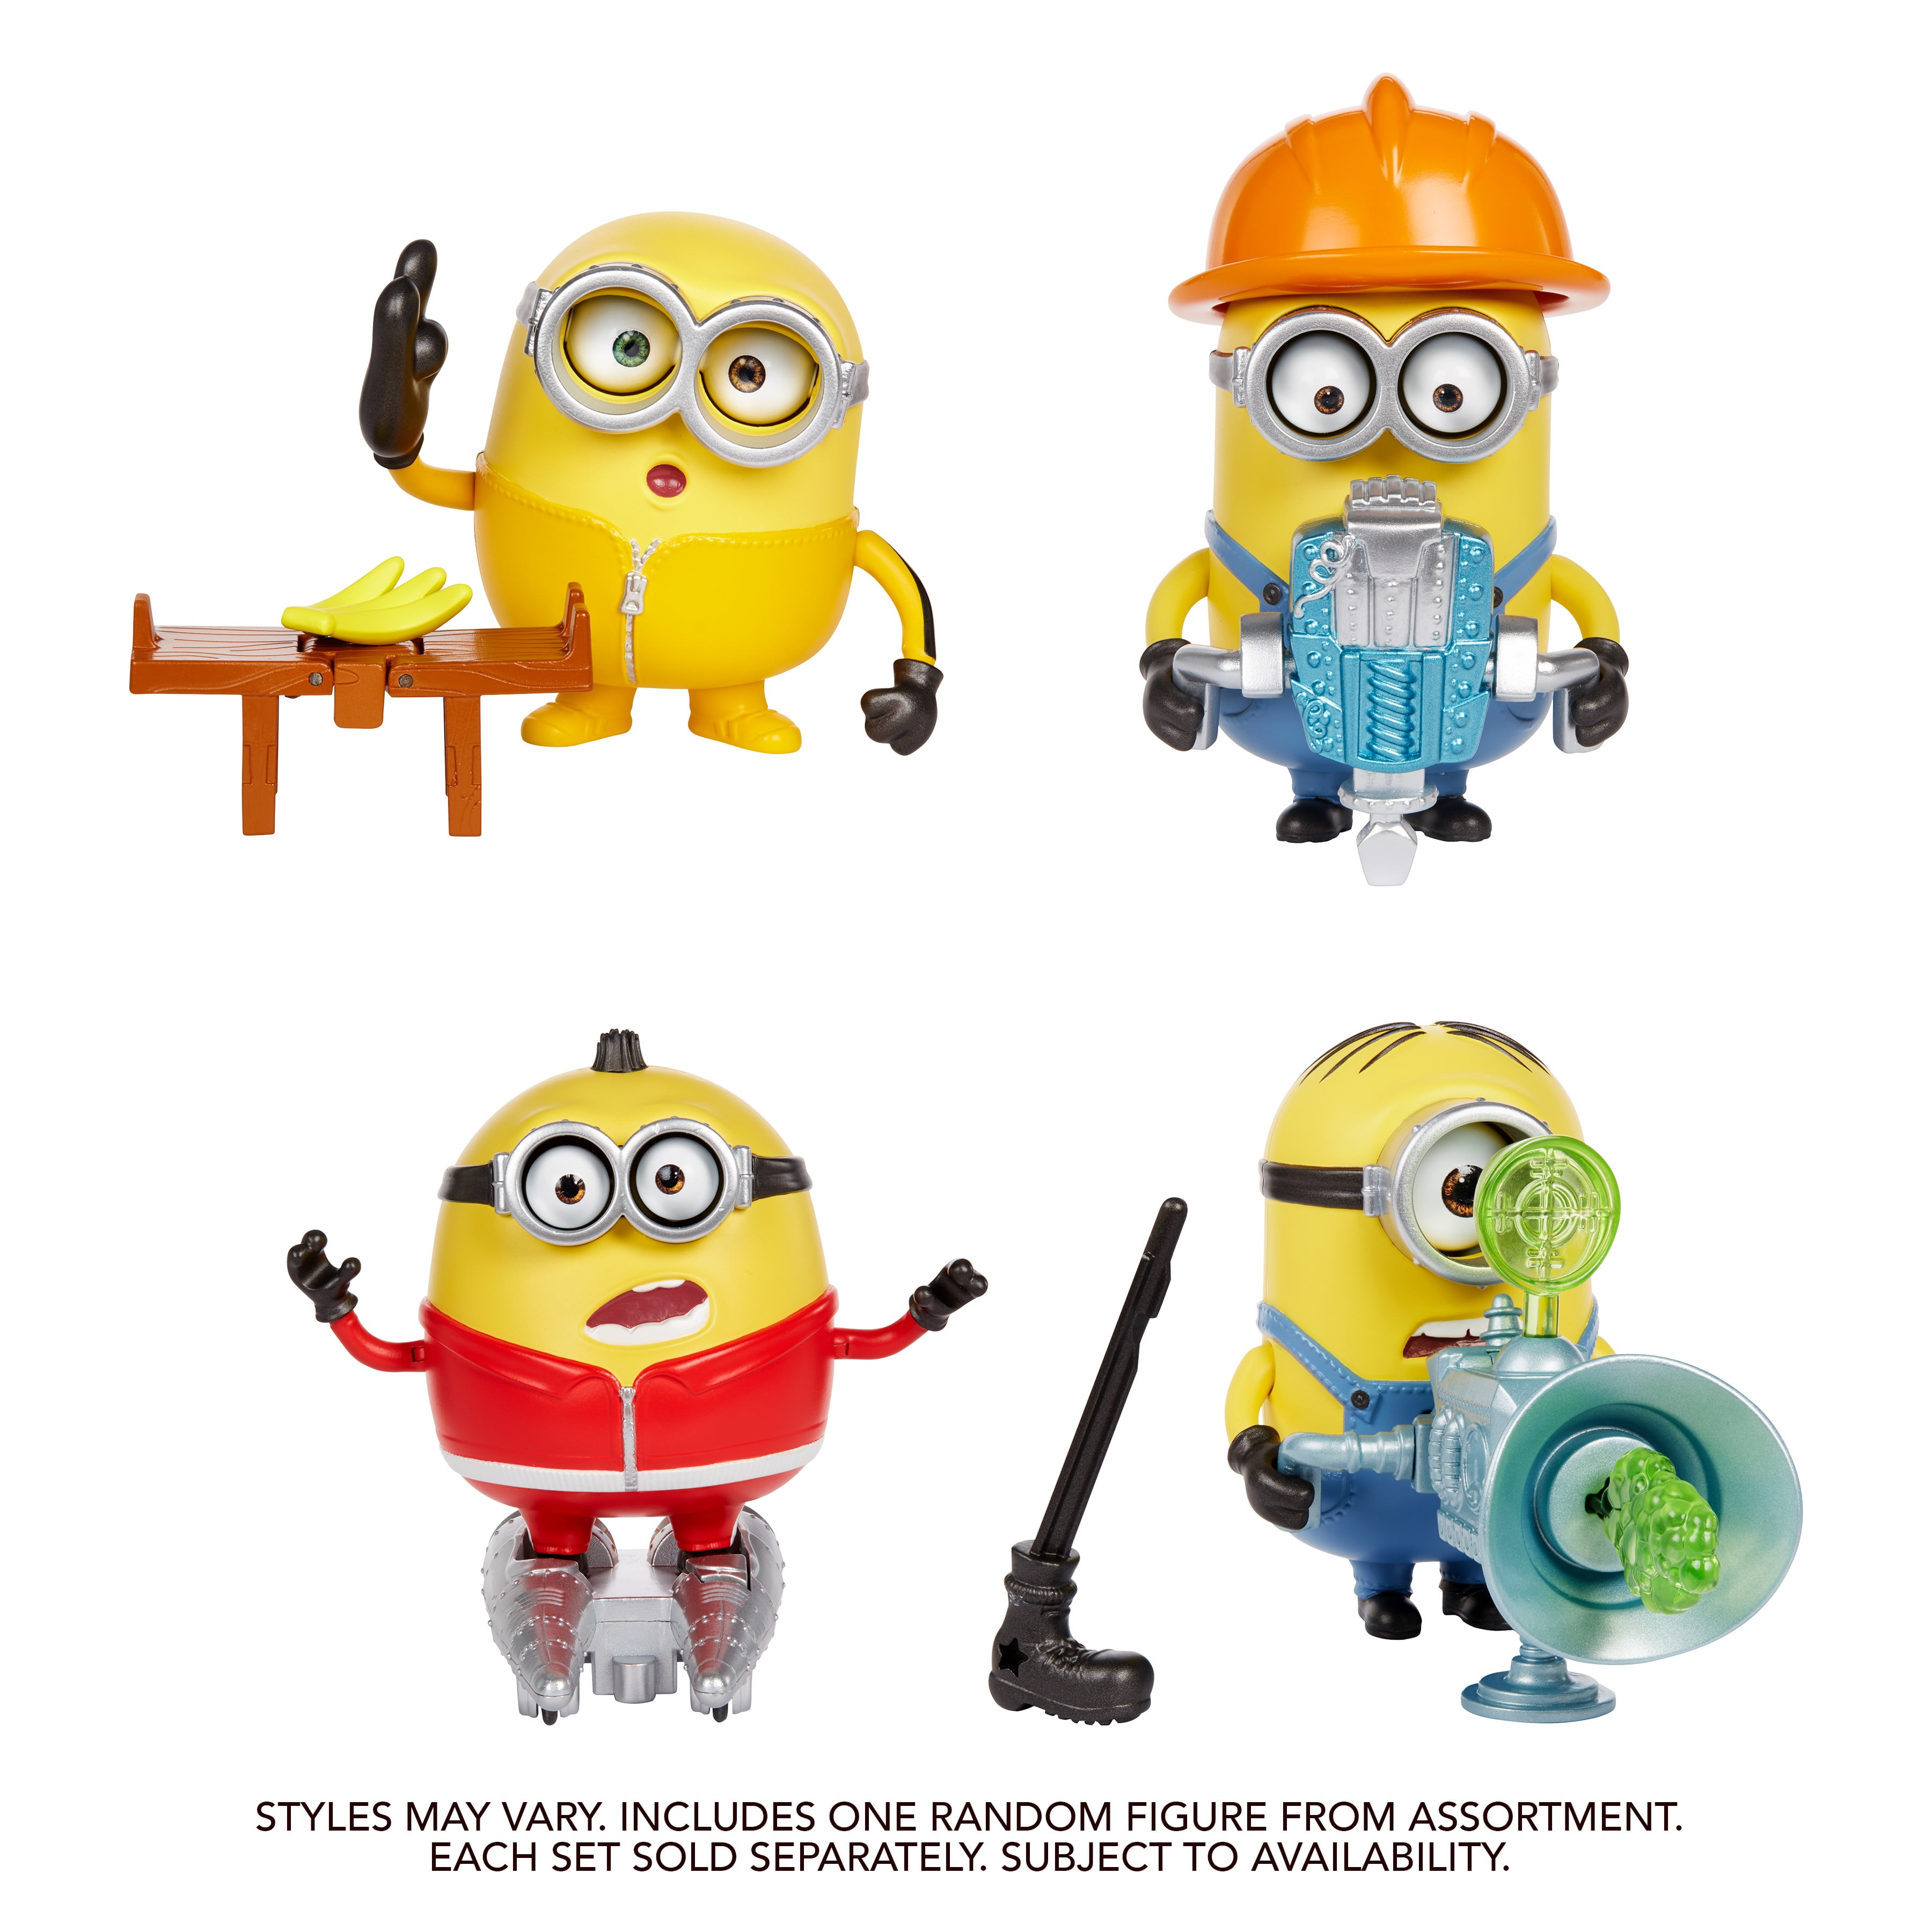 Minions The Rise Of Gru Splat Ems Kung Fu 3 Pack Toy For 4 Year Olds Up Walmart Com Walmart Com